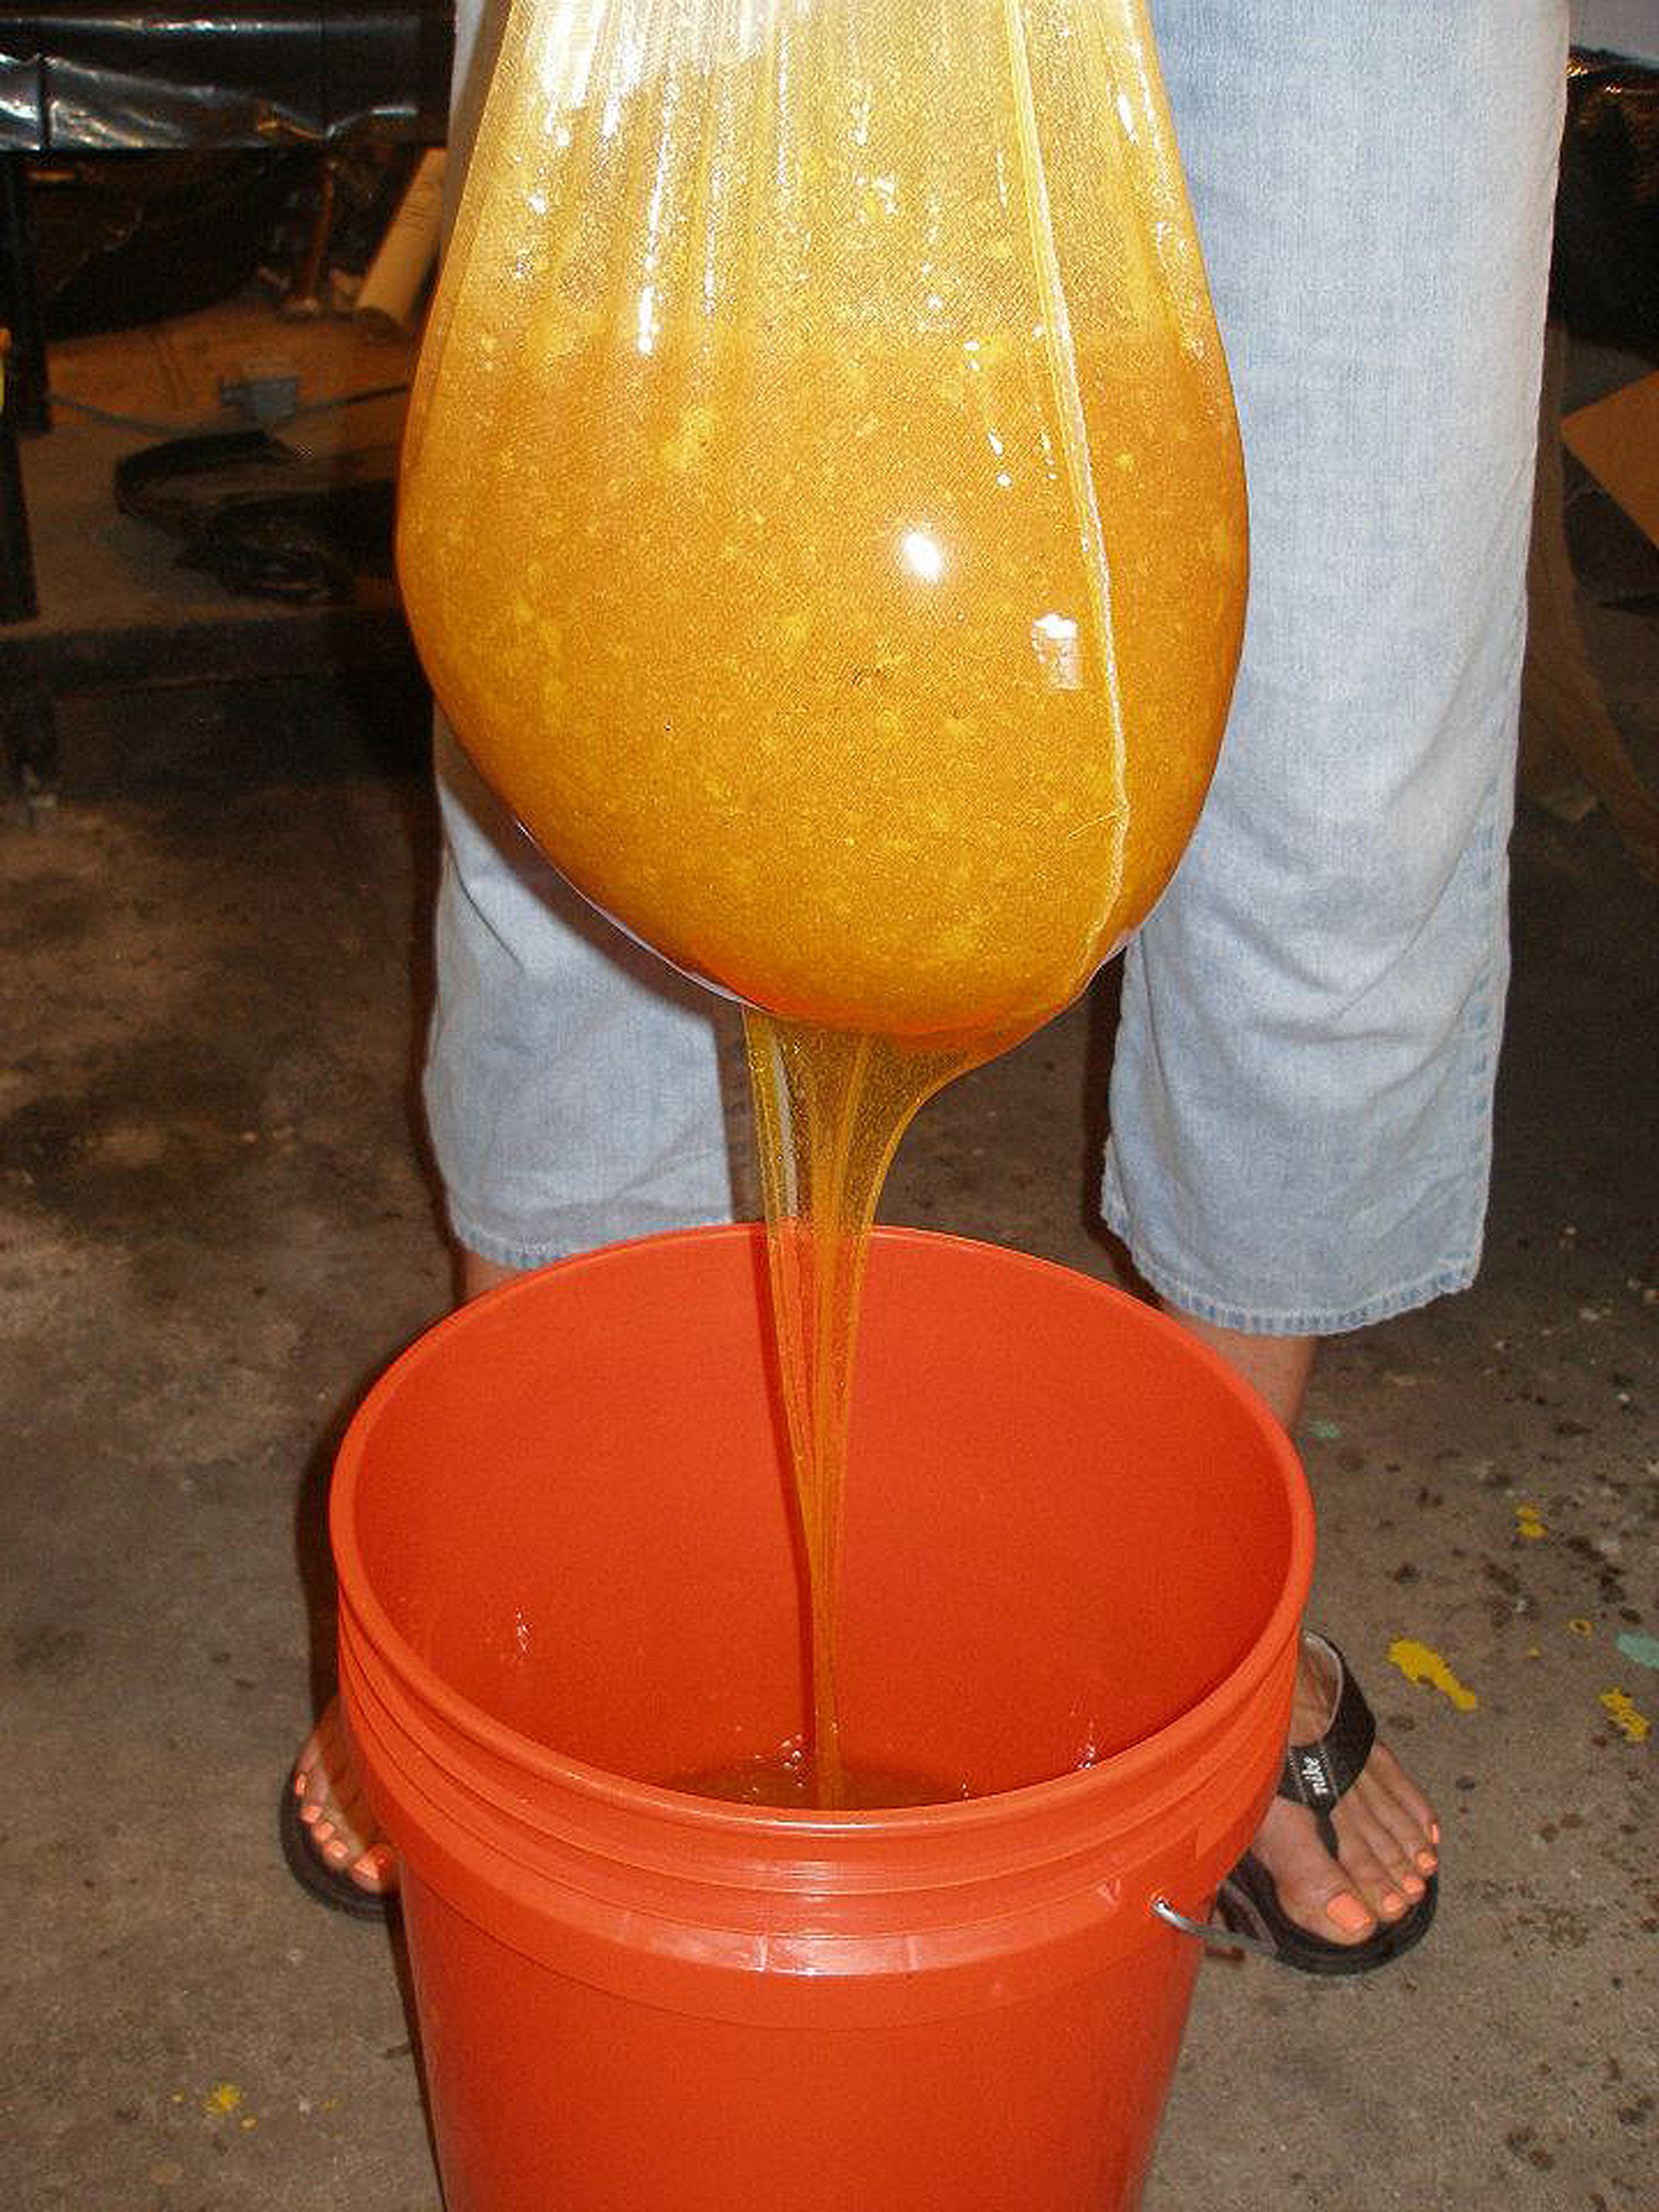 I allow the honey to flow through a cloth strainer to remove any wax particles before transferring to the stainless steel holding tank.